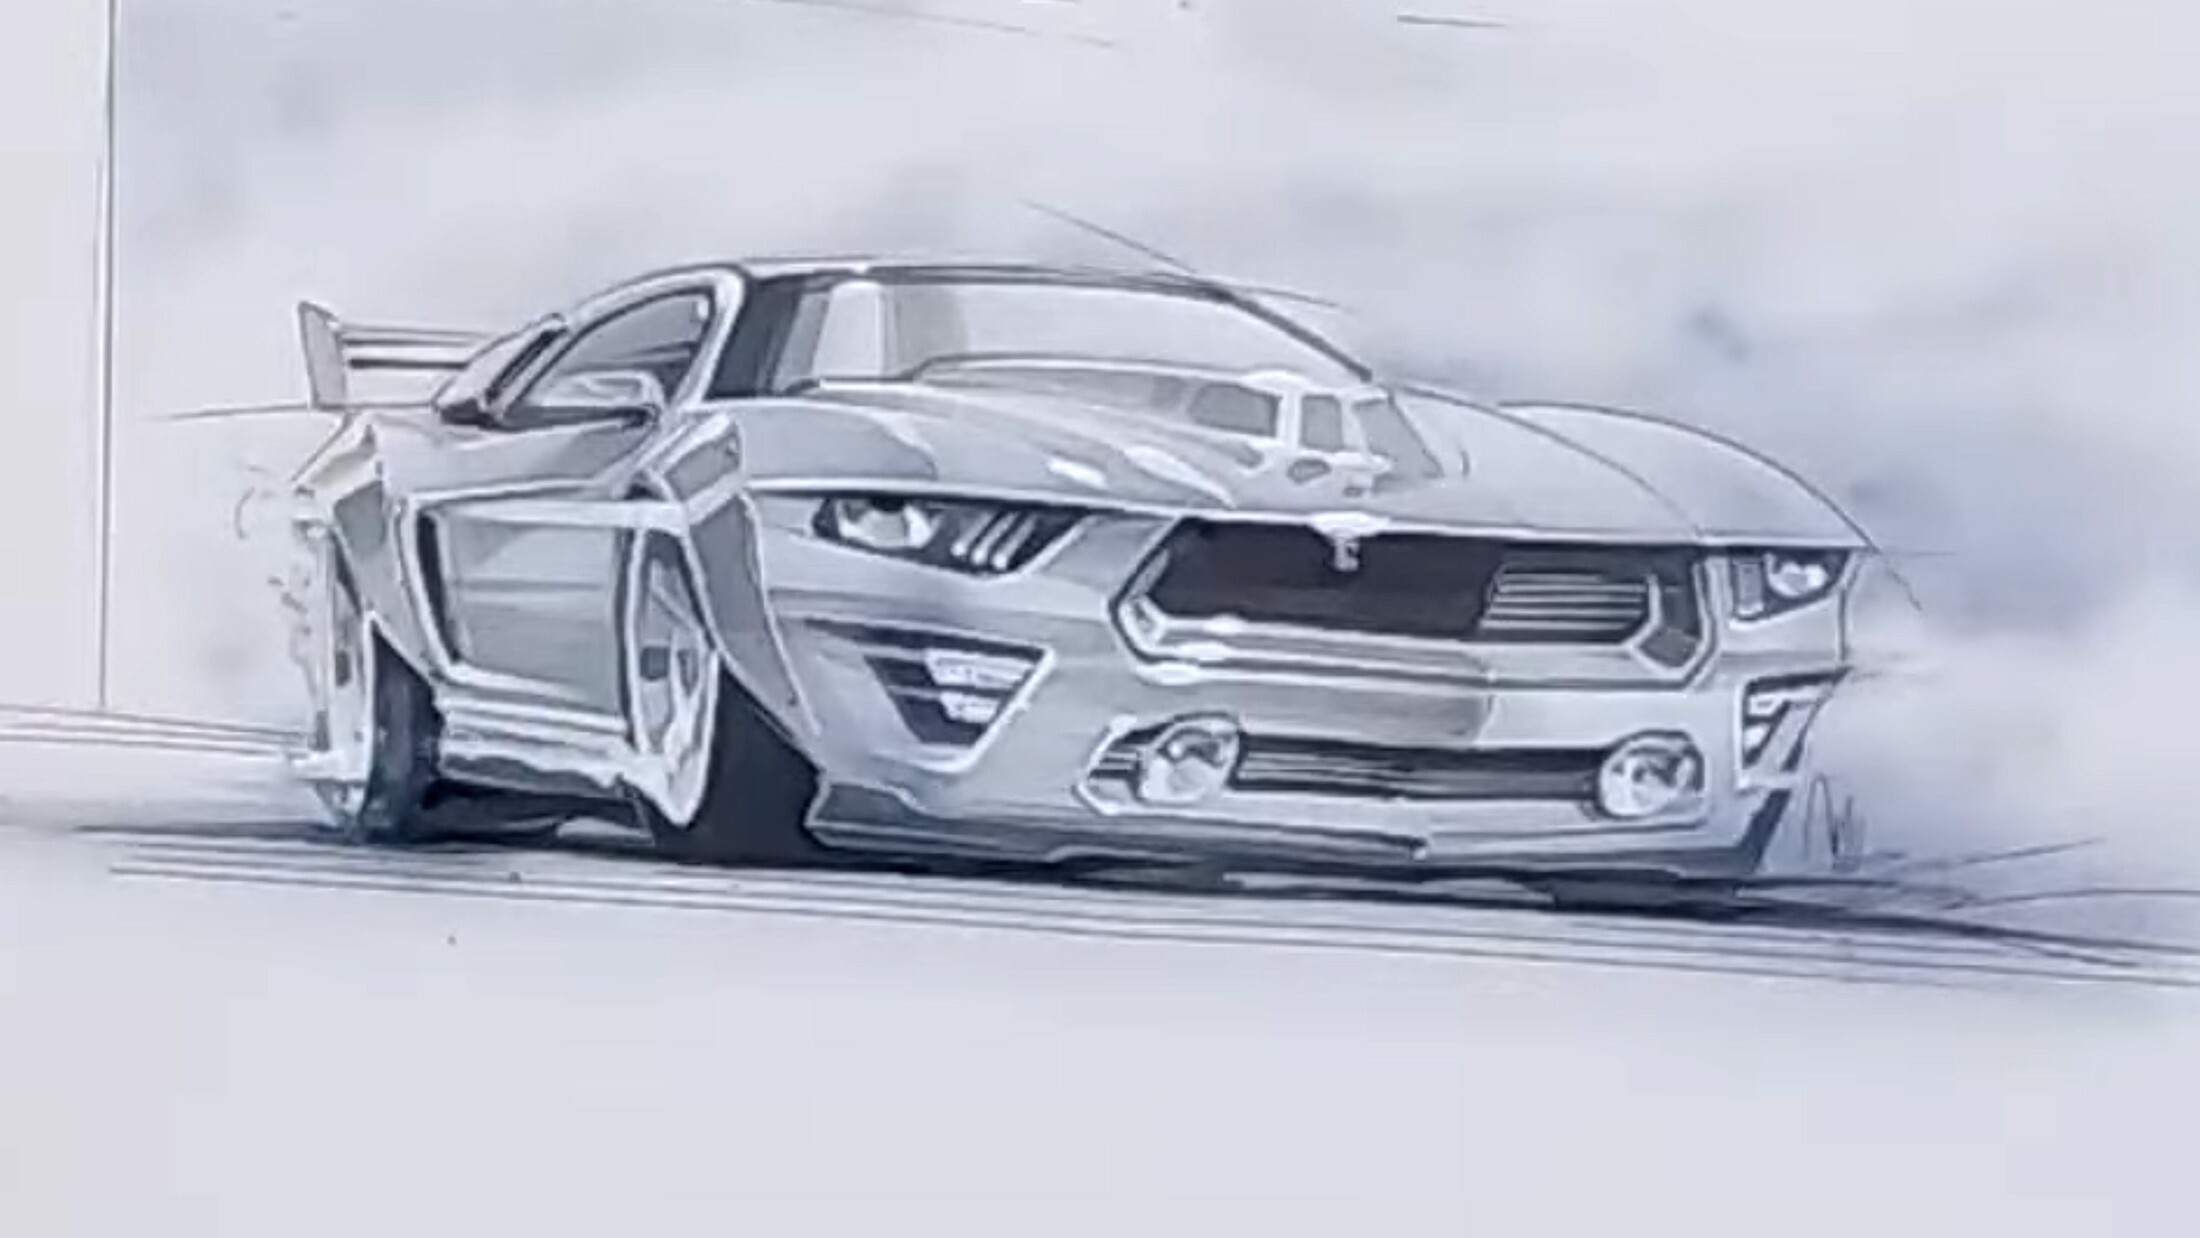 How to draw Ford Mustang Easy - Basic Car Drawing - YouTube